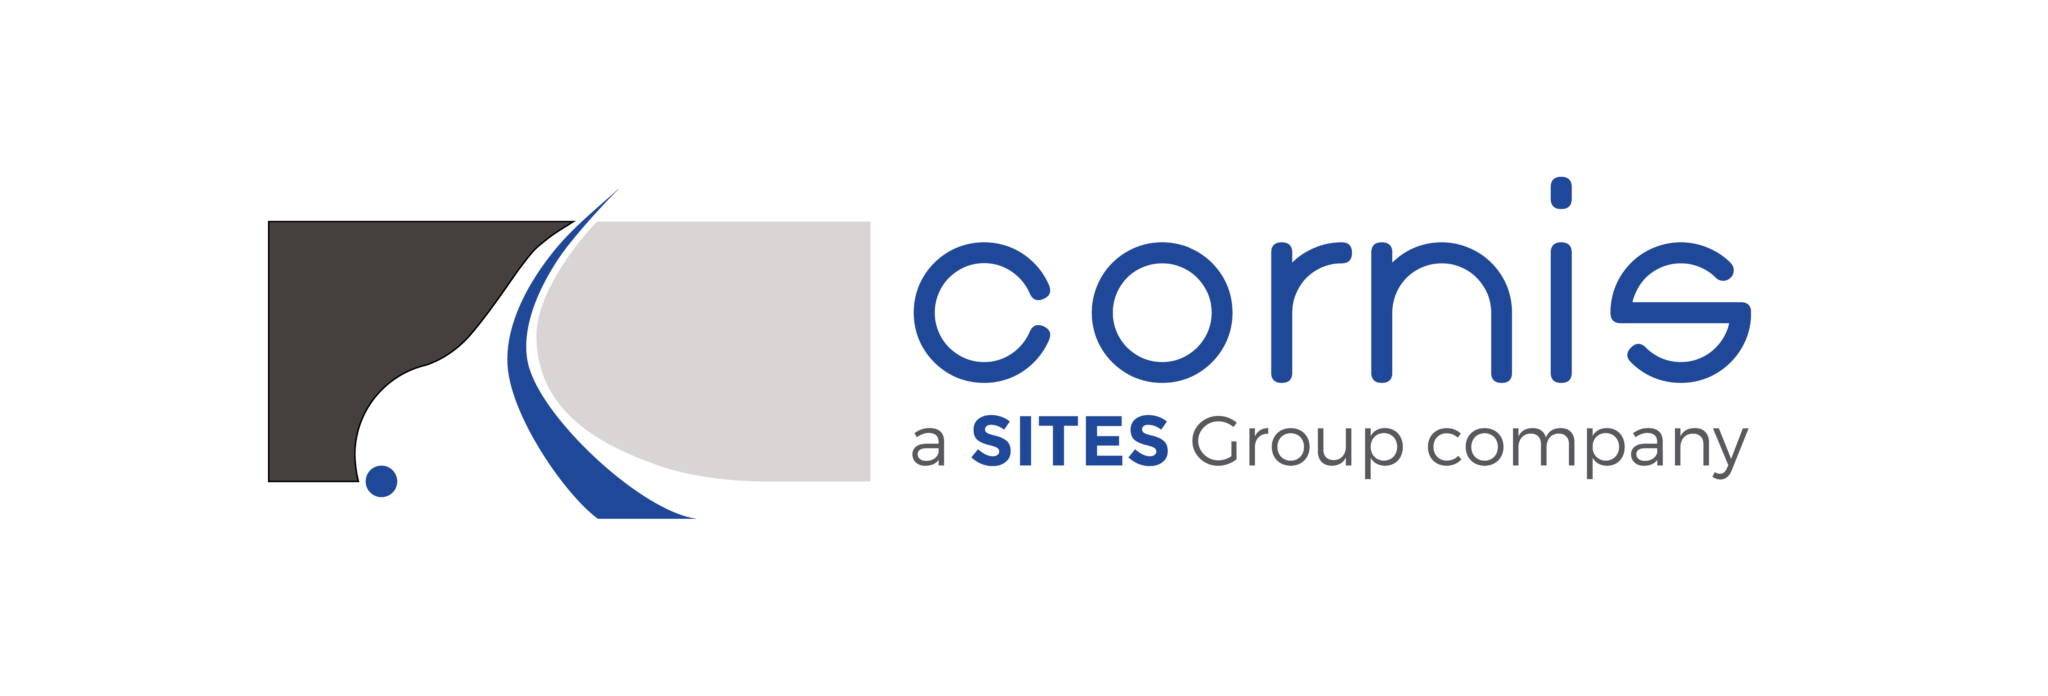 Cornis merges into SITES group - SITES